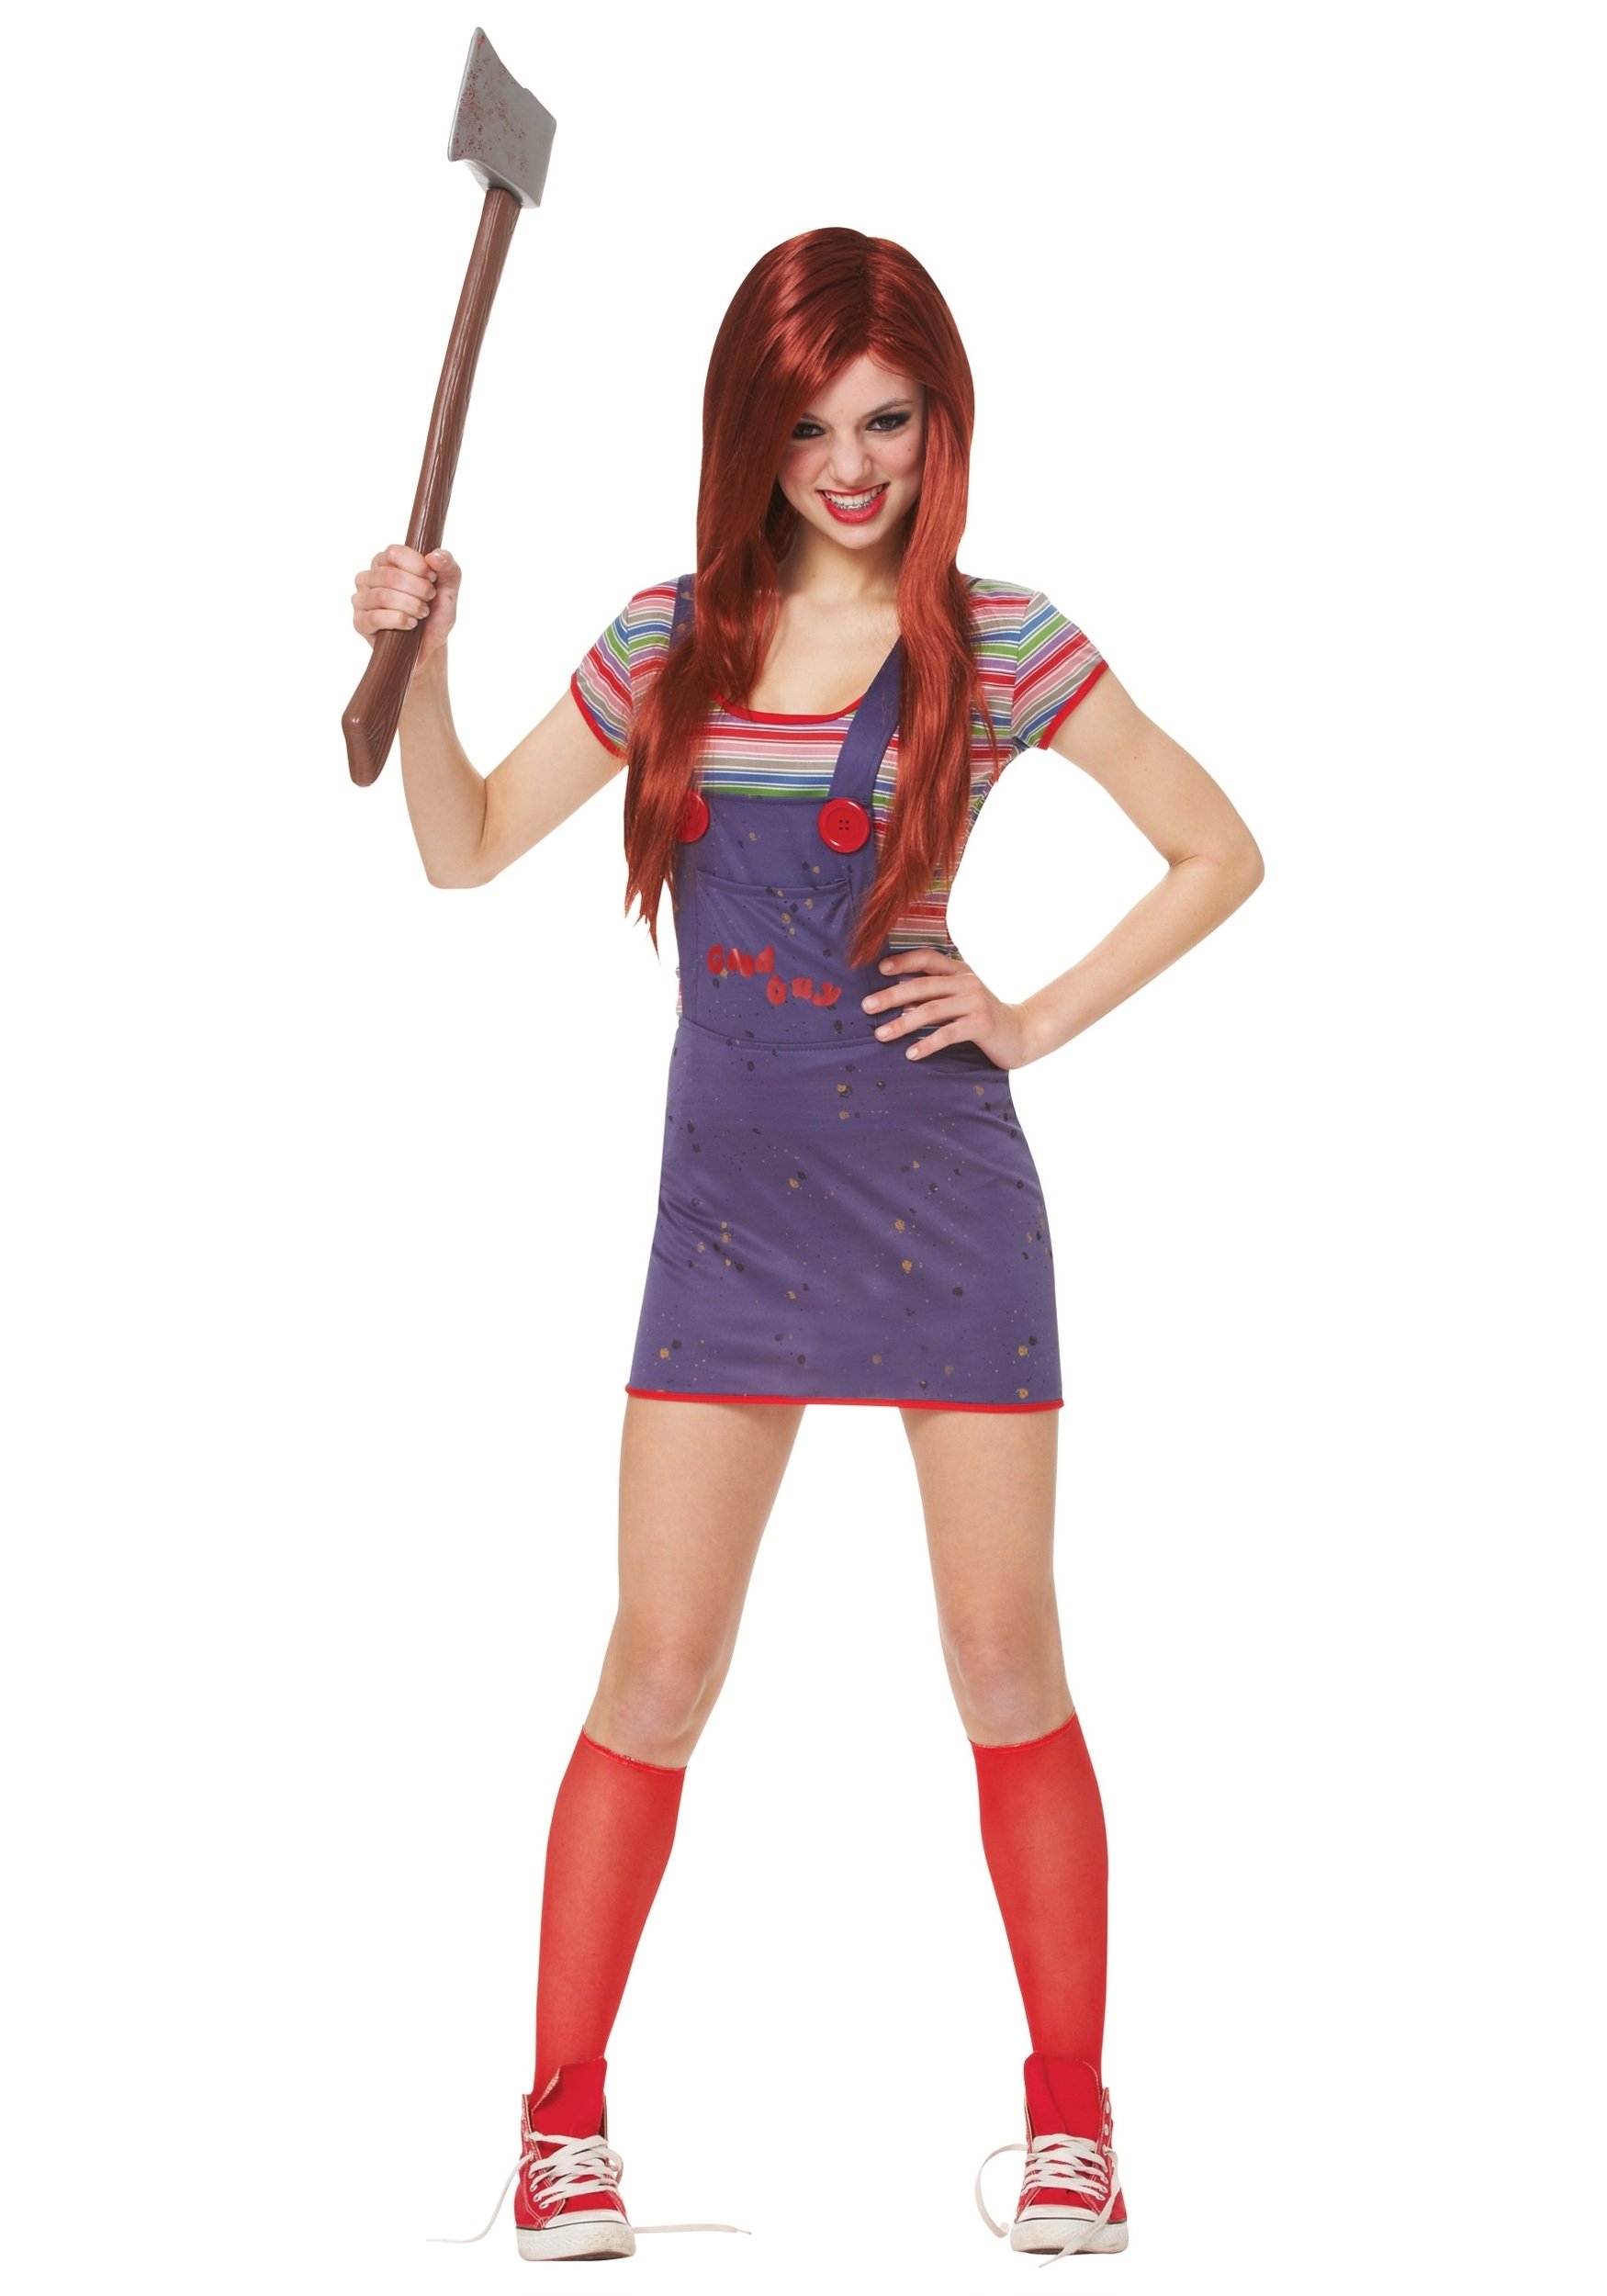 10 Most Recommended Adult Unique Halloween Costume Ideas scary halloween costumes cute halloween costumes for teenage girls 1 2022